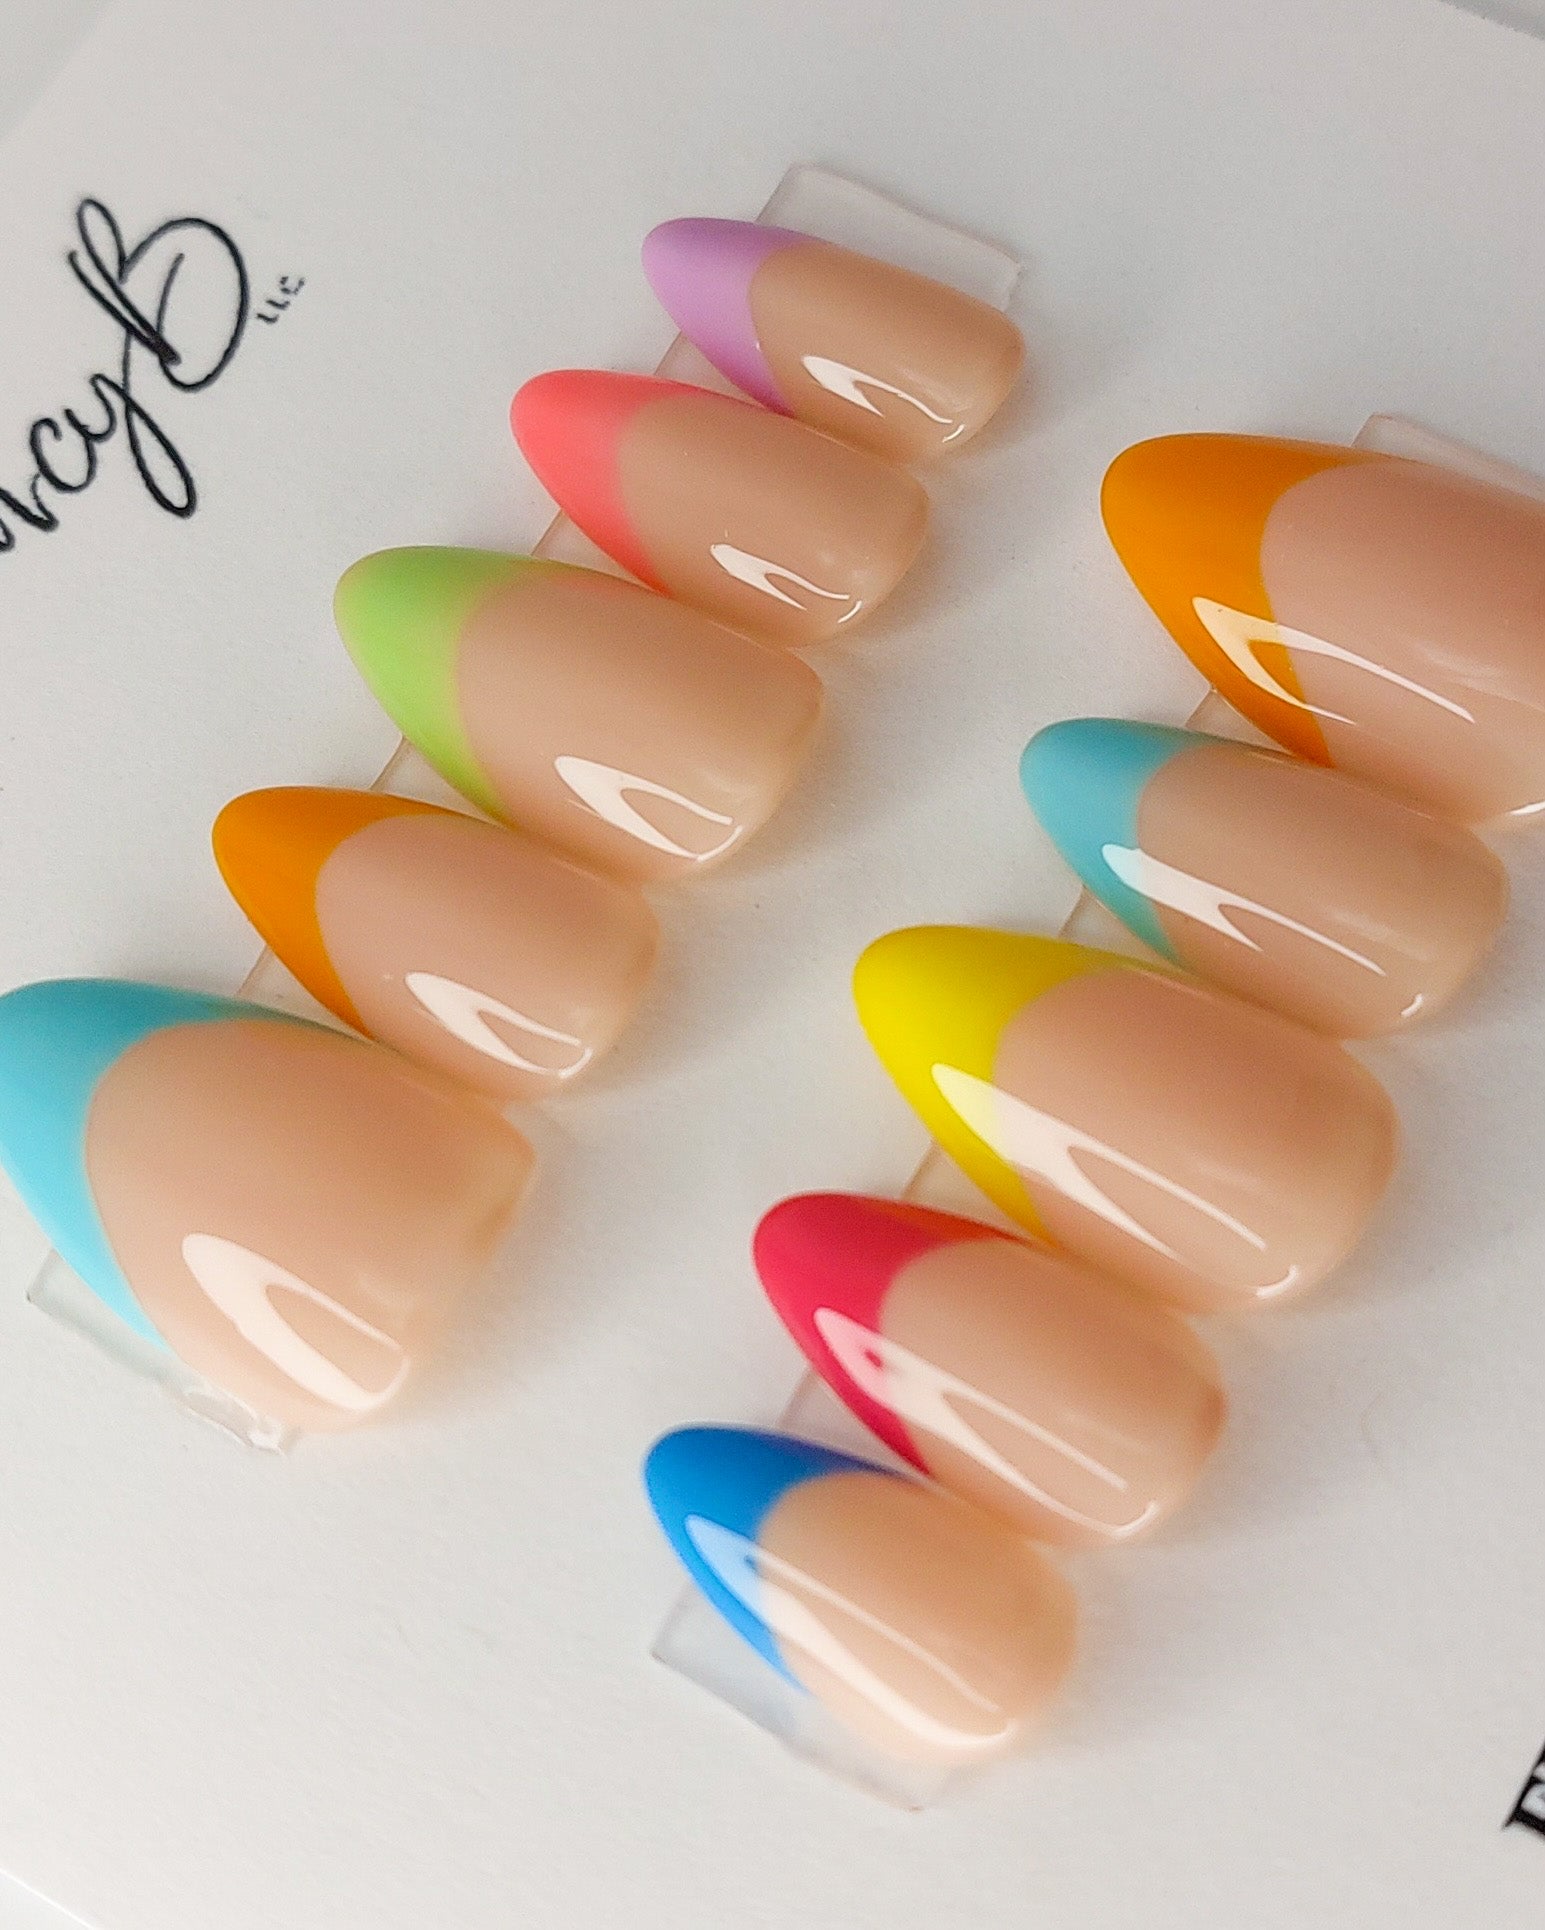 Custom press on nails with colorful french tip press on nails with nude gel and multi-colored french tips. Rainbow press on french tips.